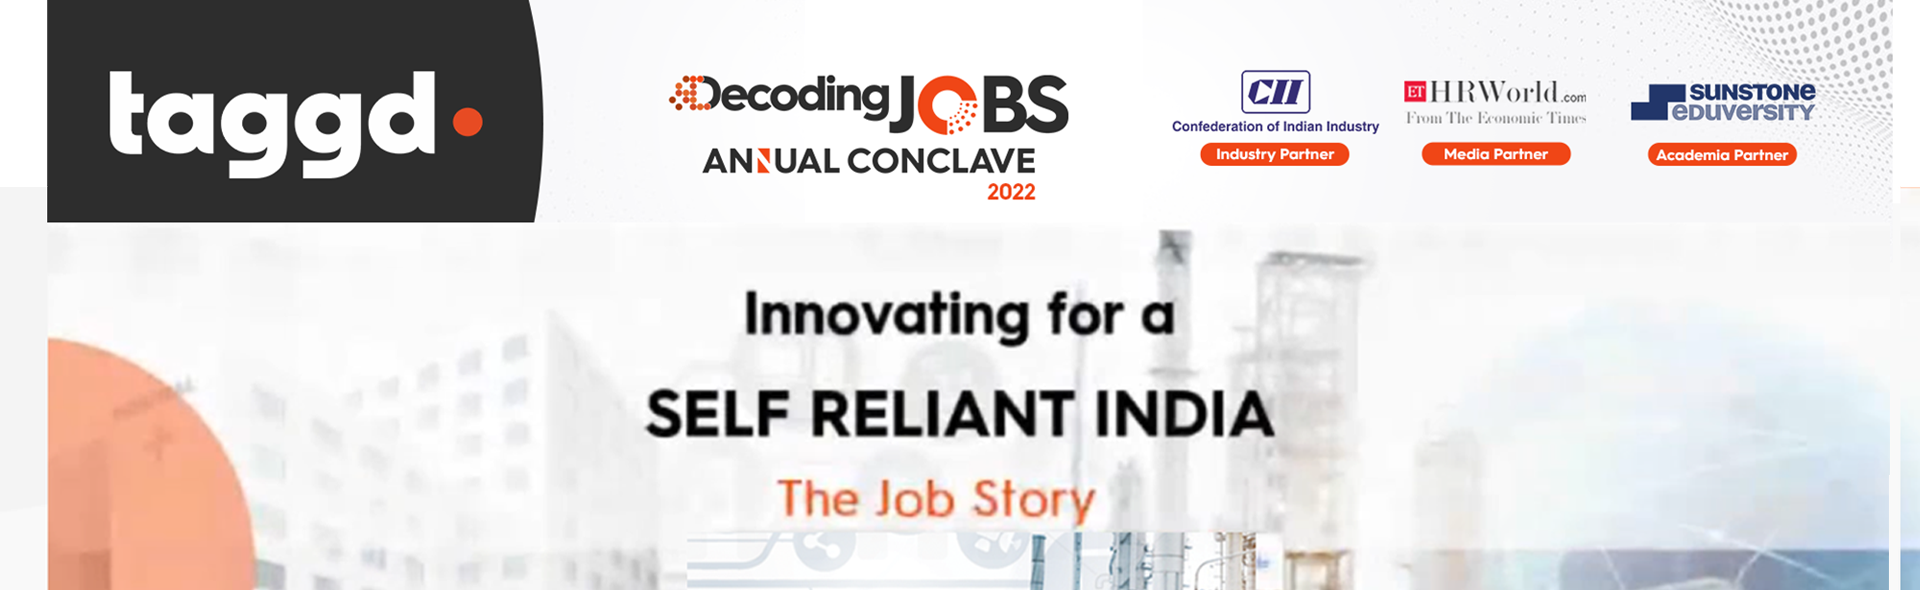 Decoding Jobs Annual Conclave 2022